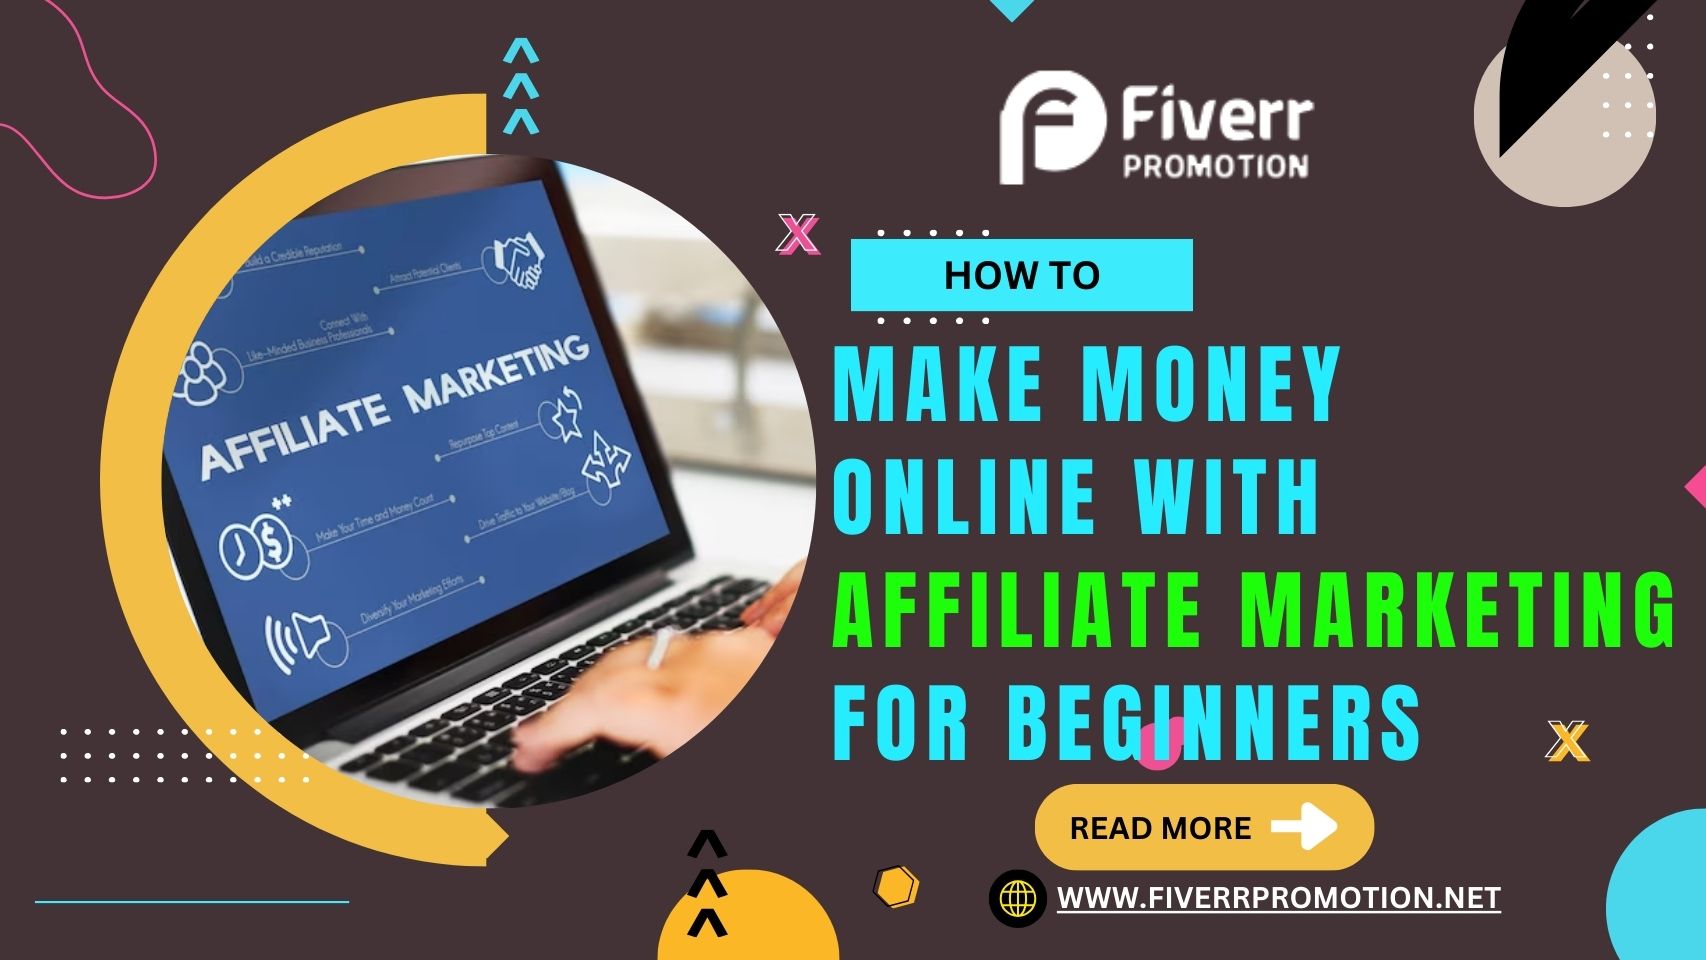 How to Make Money Online with Affiliate Marketing for Beginners